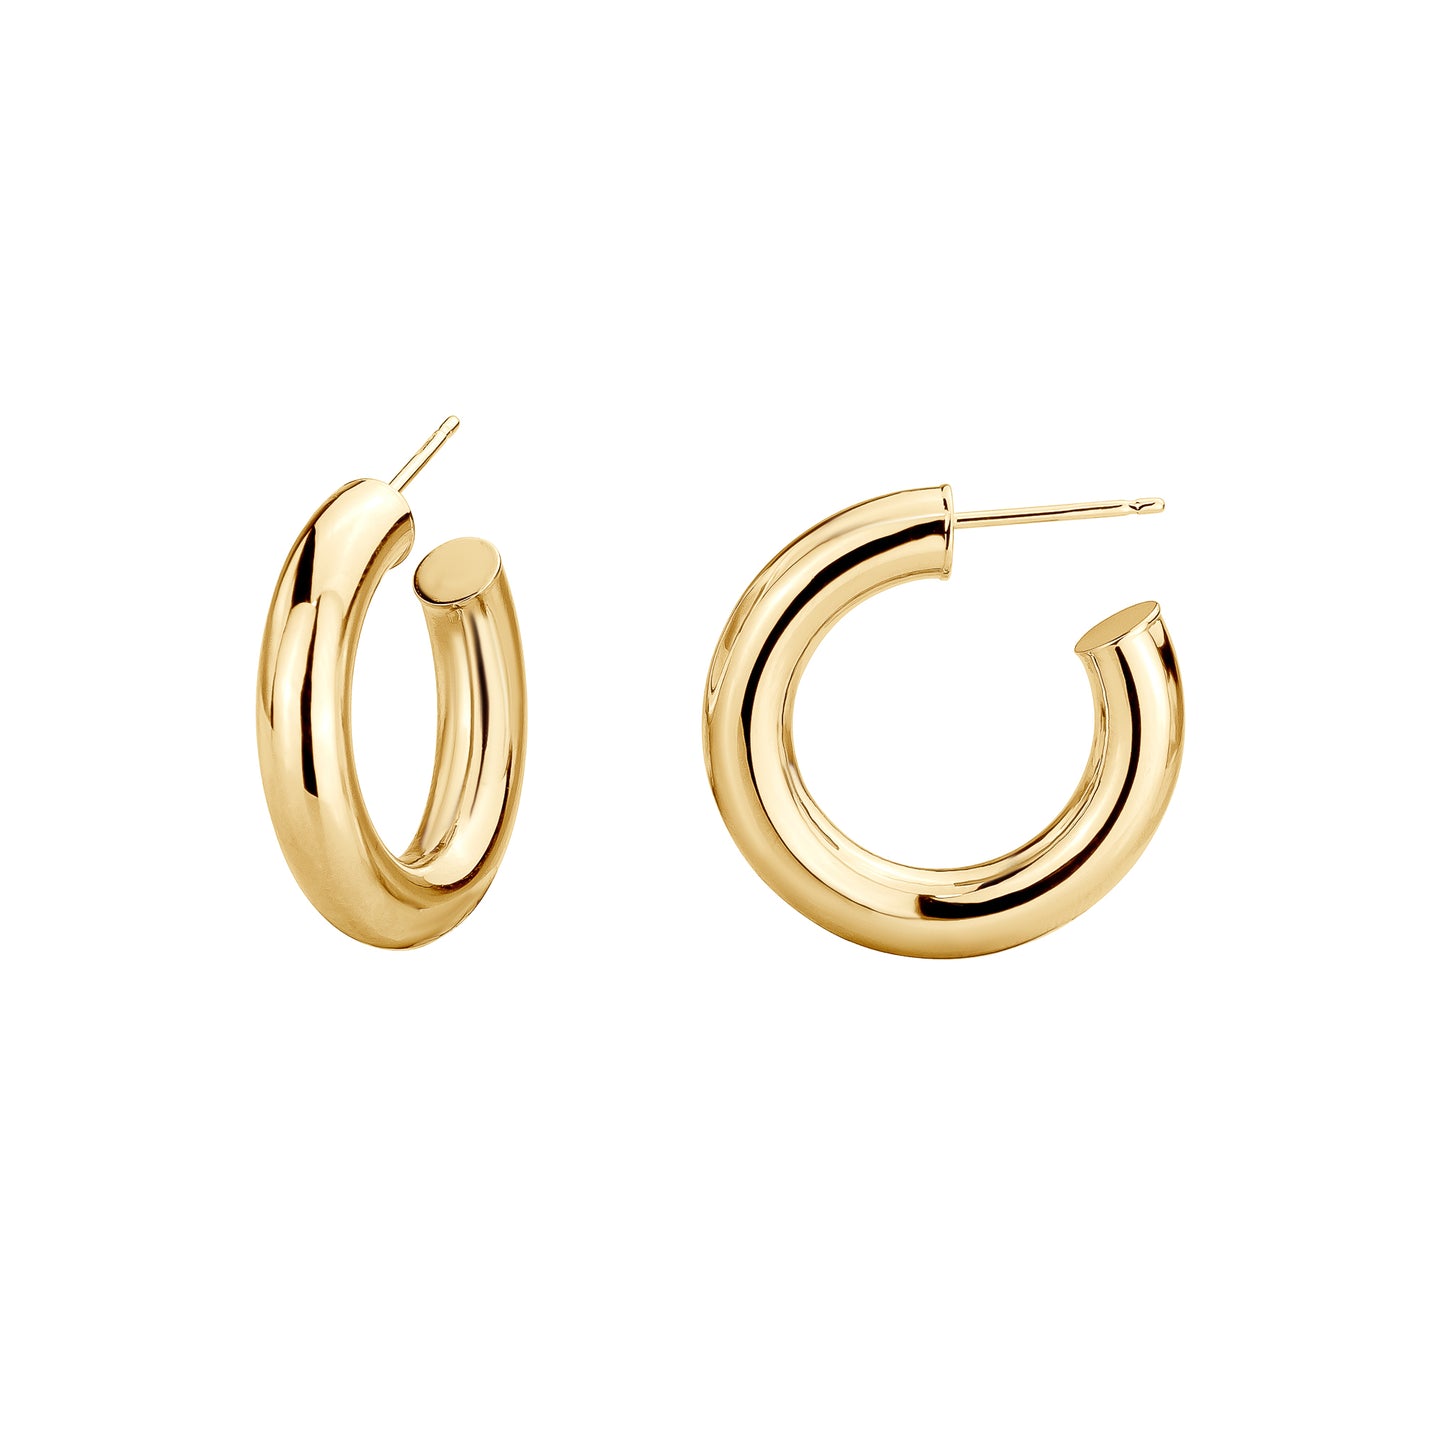 5 mm Gold Hoops on Post- 5 x 25 mm